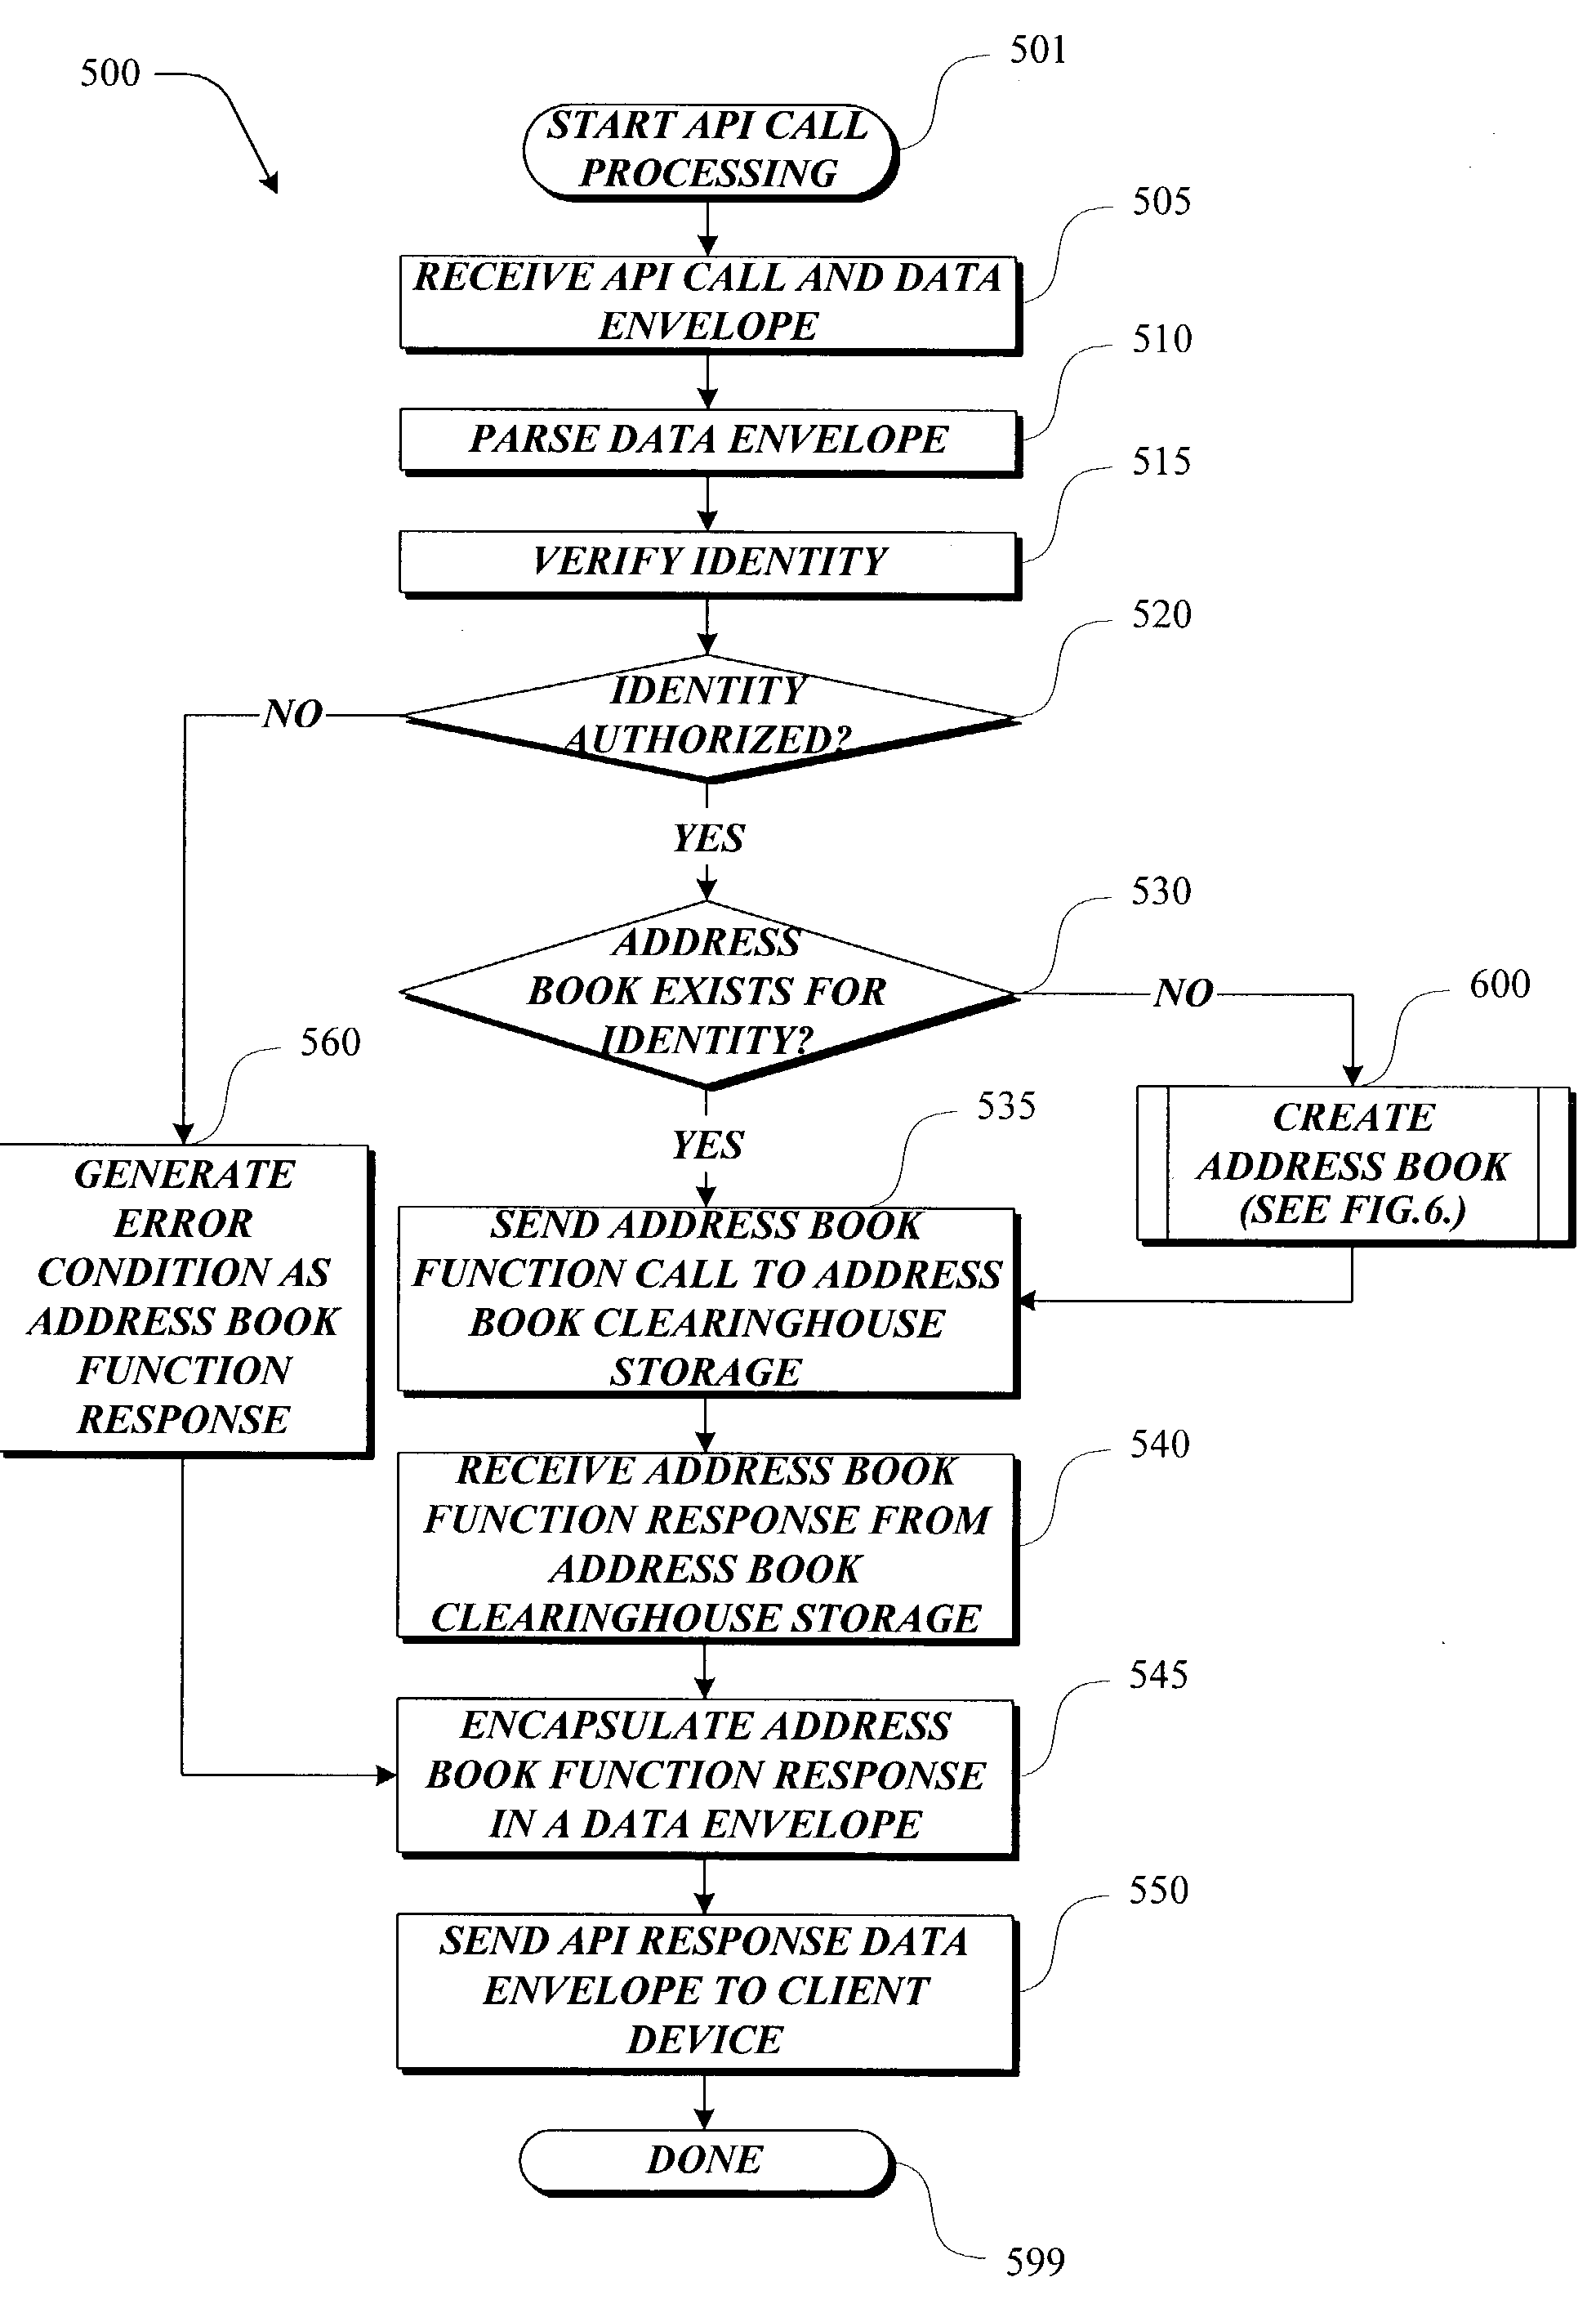 Address book clearinghouse interface system and method